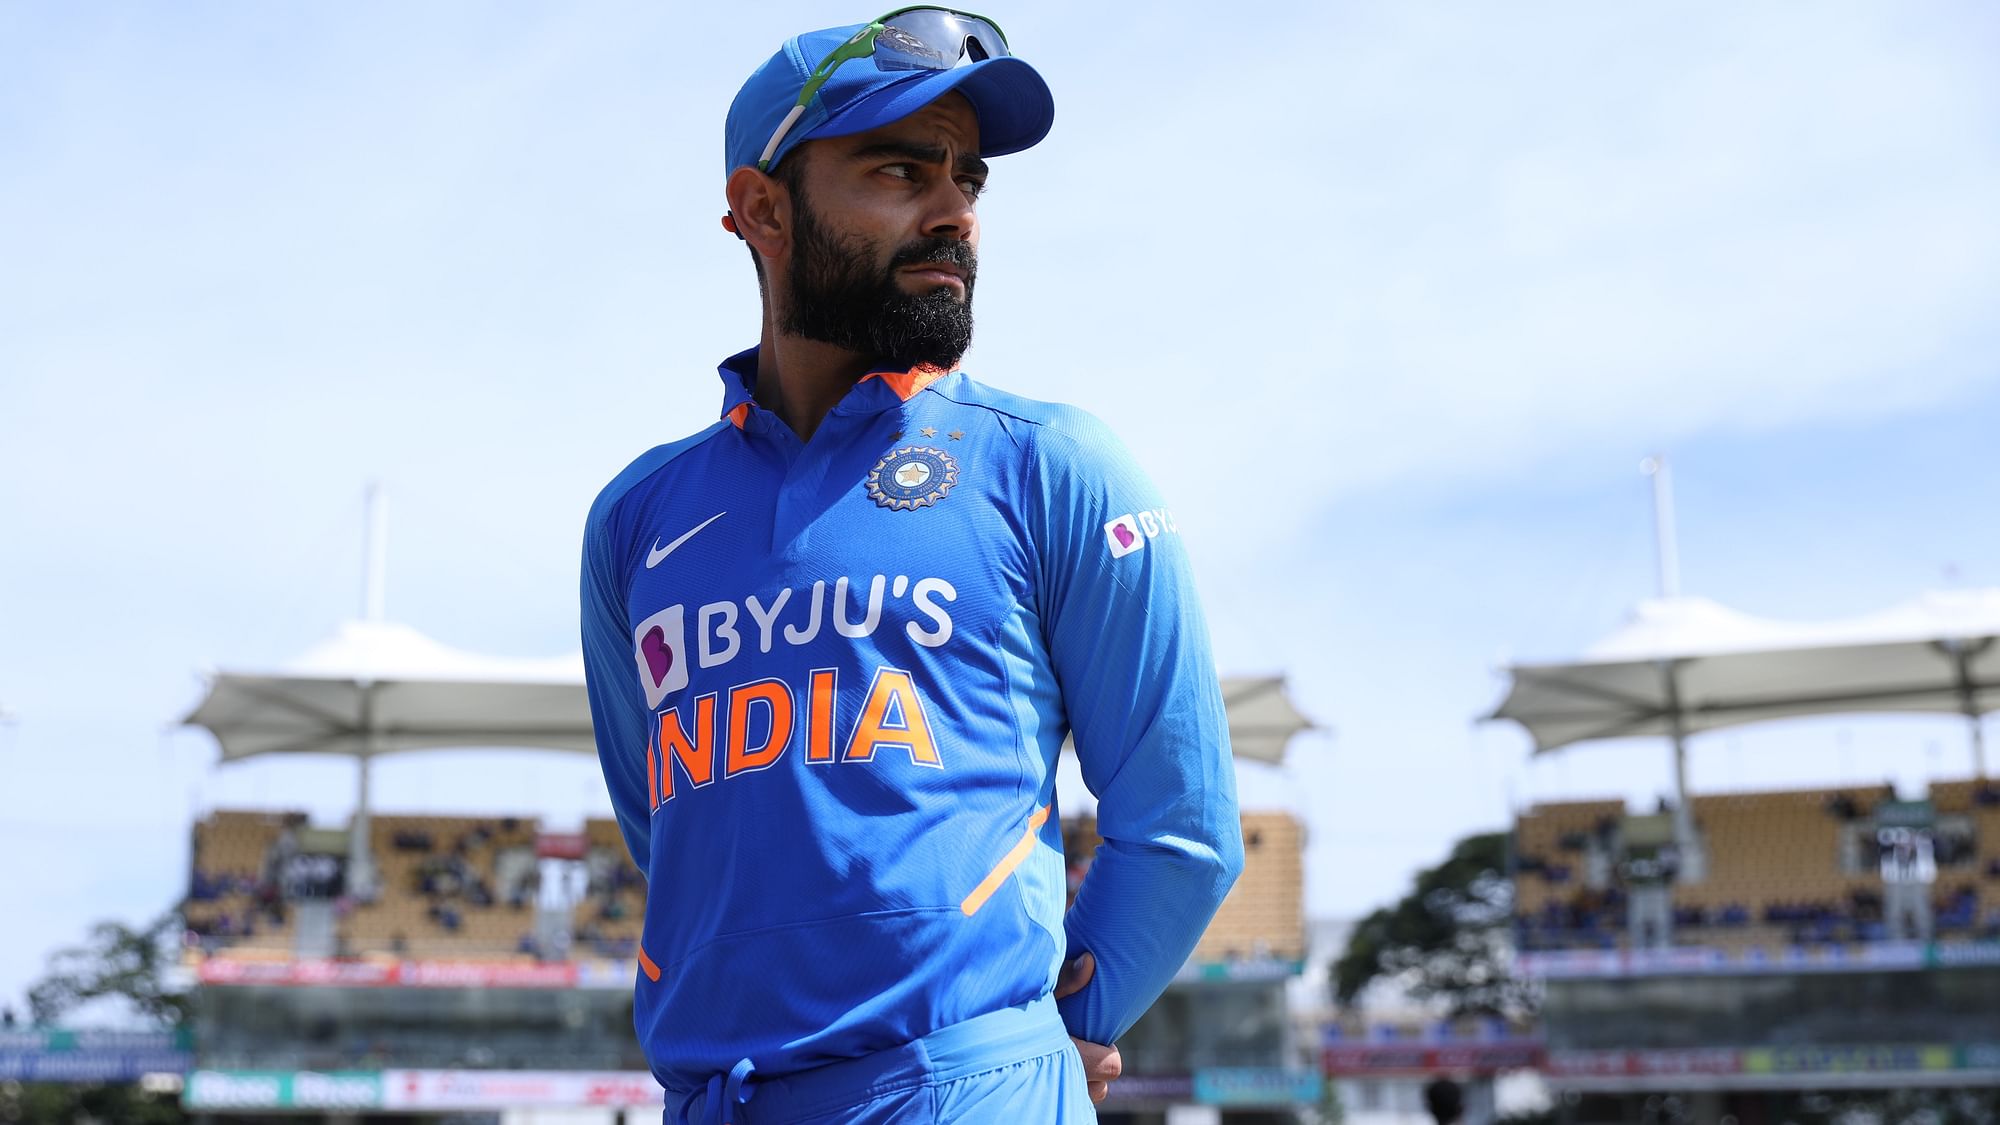 Indian skipper Virat Kohli has been included in the list of five cricketers of the decade announced by Wisden along with Steve Smith, Dale Steyn, AB de Villiers and Ellyse Perry.